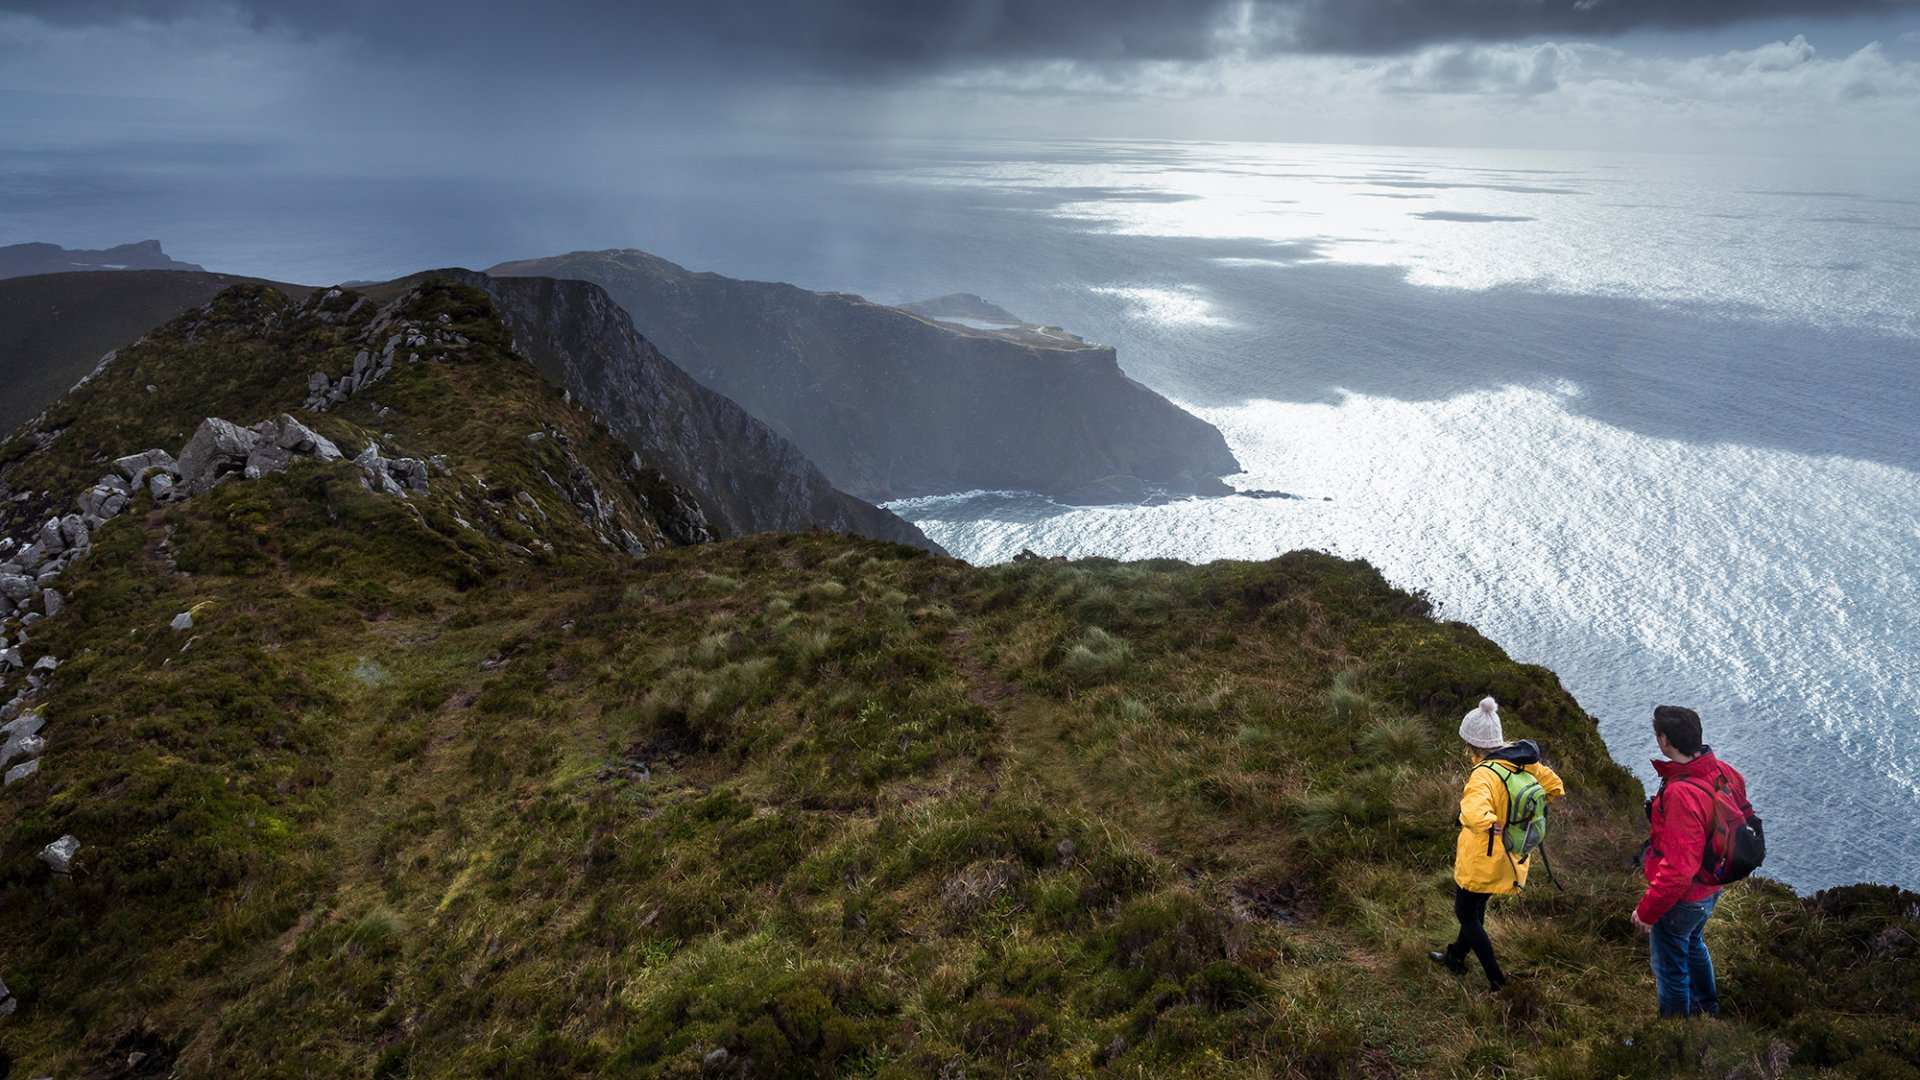 A couple hiking along the Slieve League cliffs with a magnificent view of the Atlantic Ocean